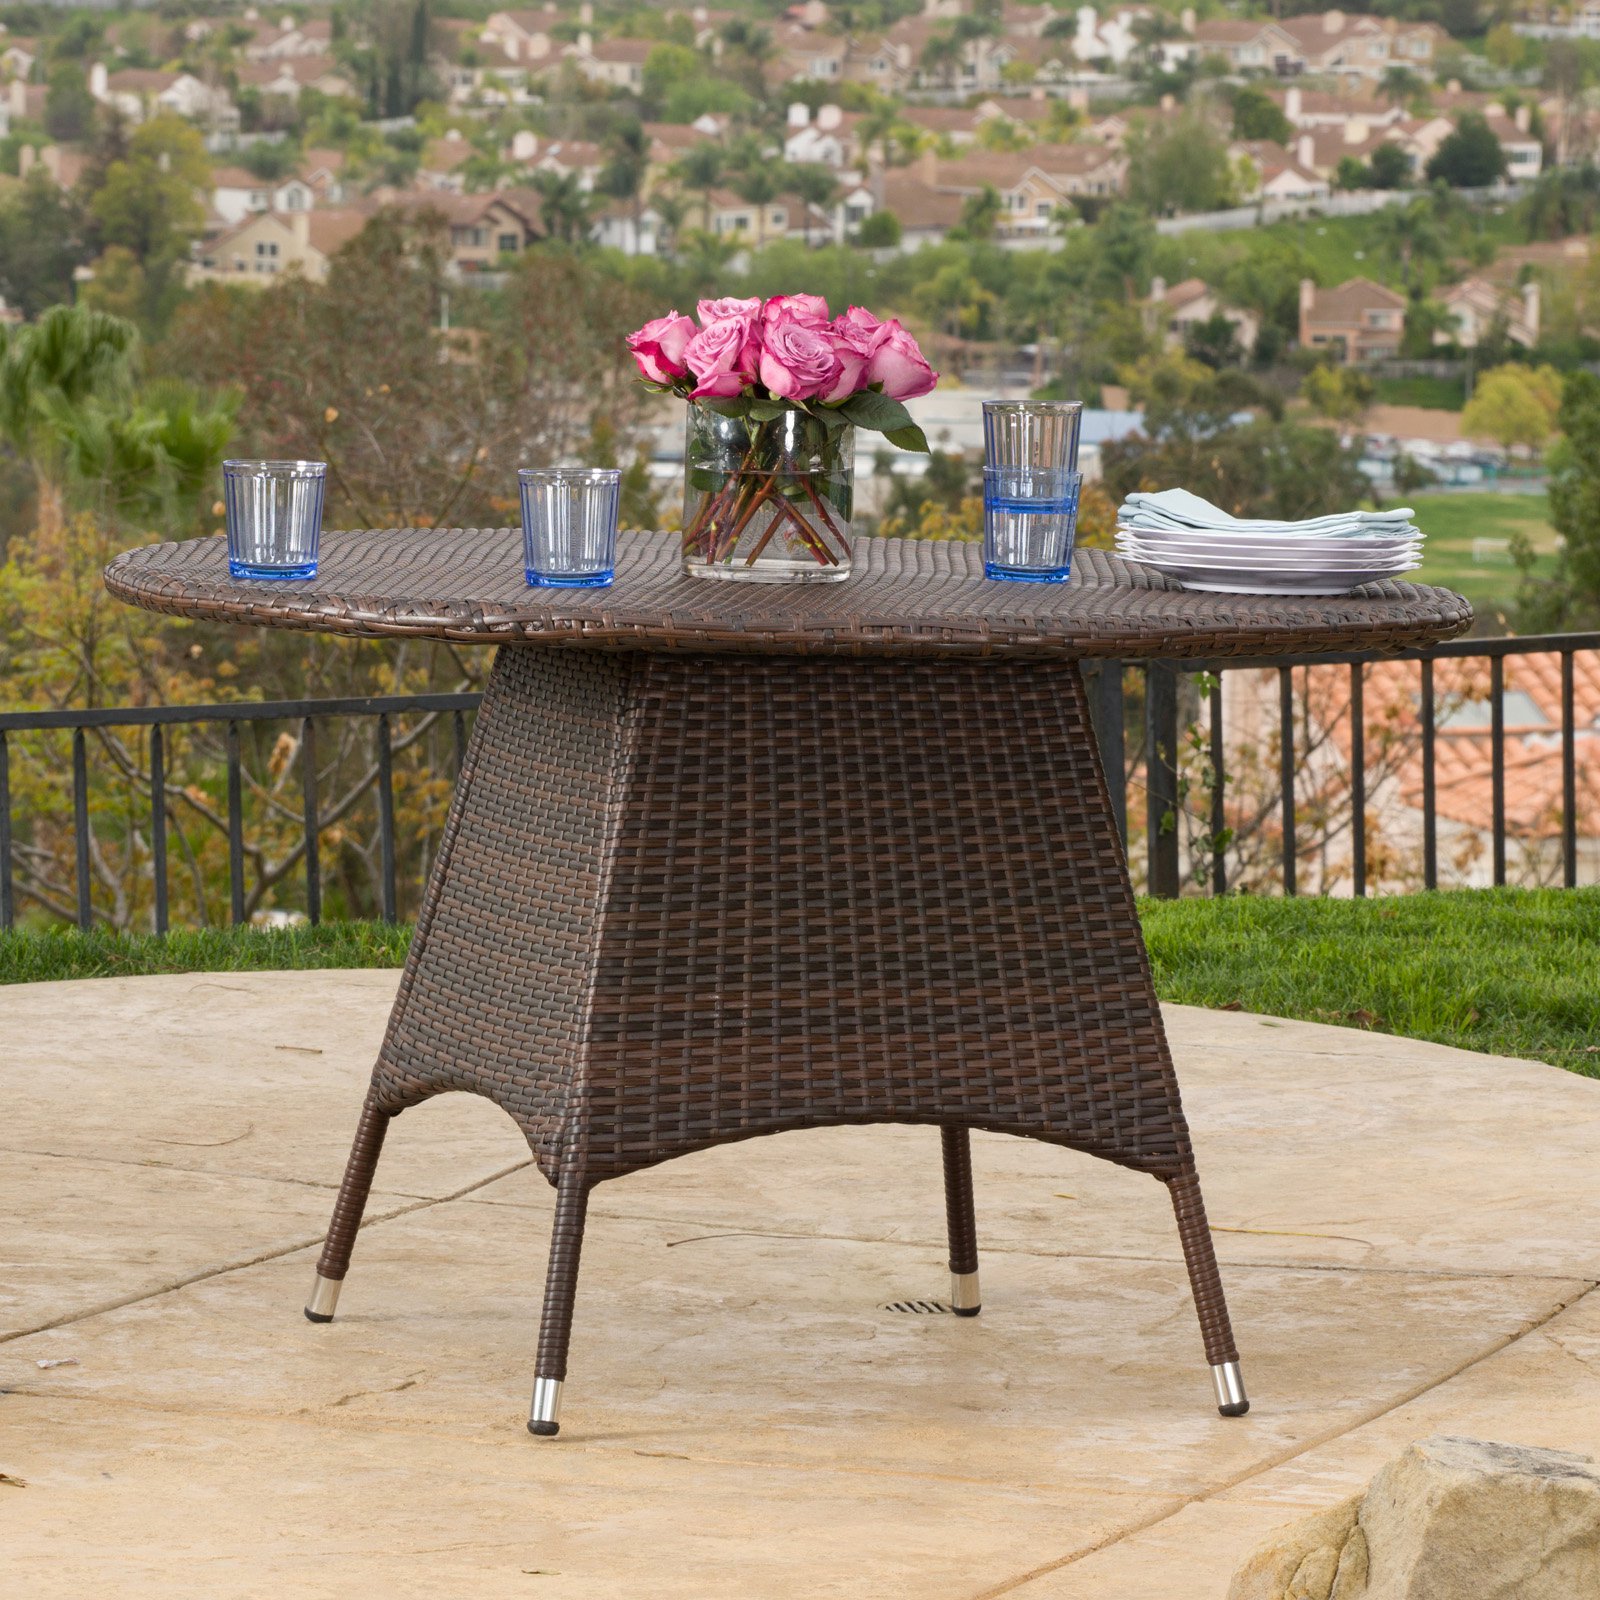 Corsica Round Patio Dining Table - image 1 of 7